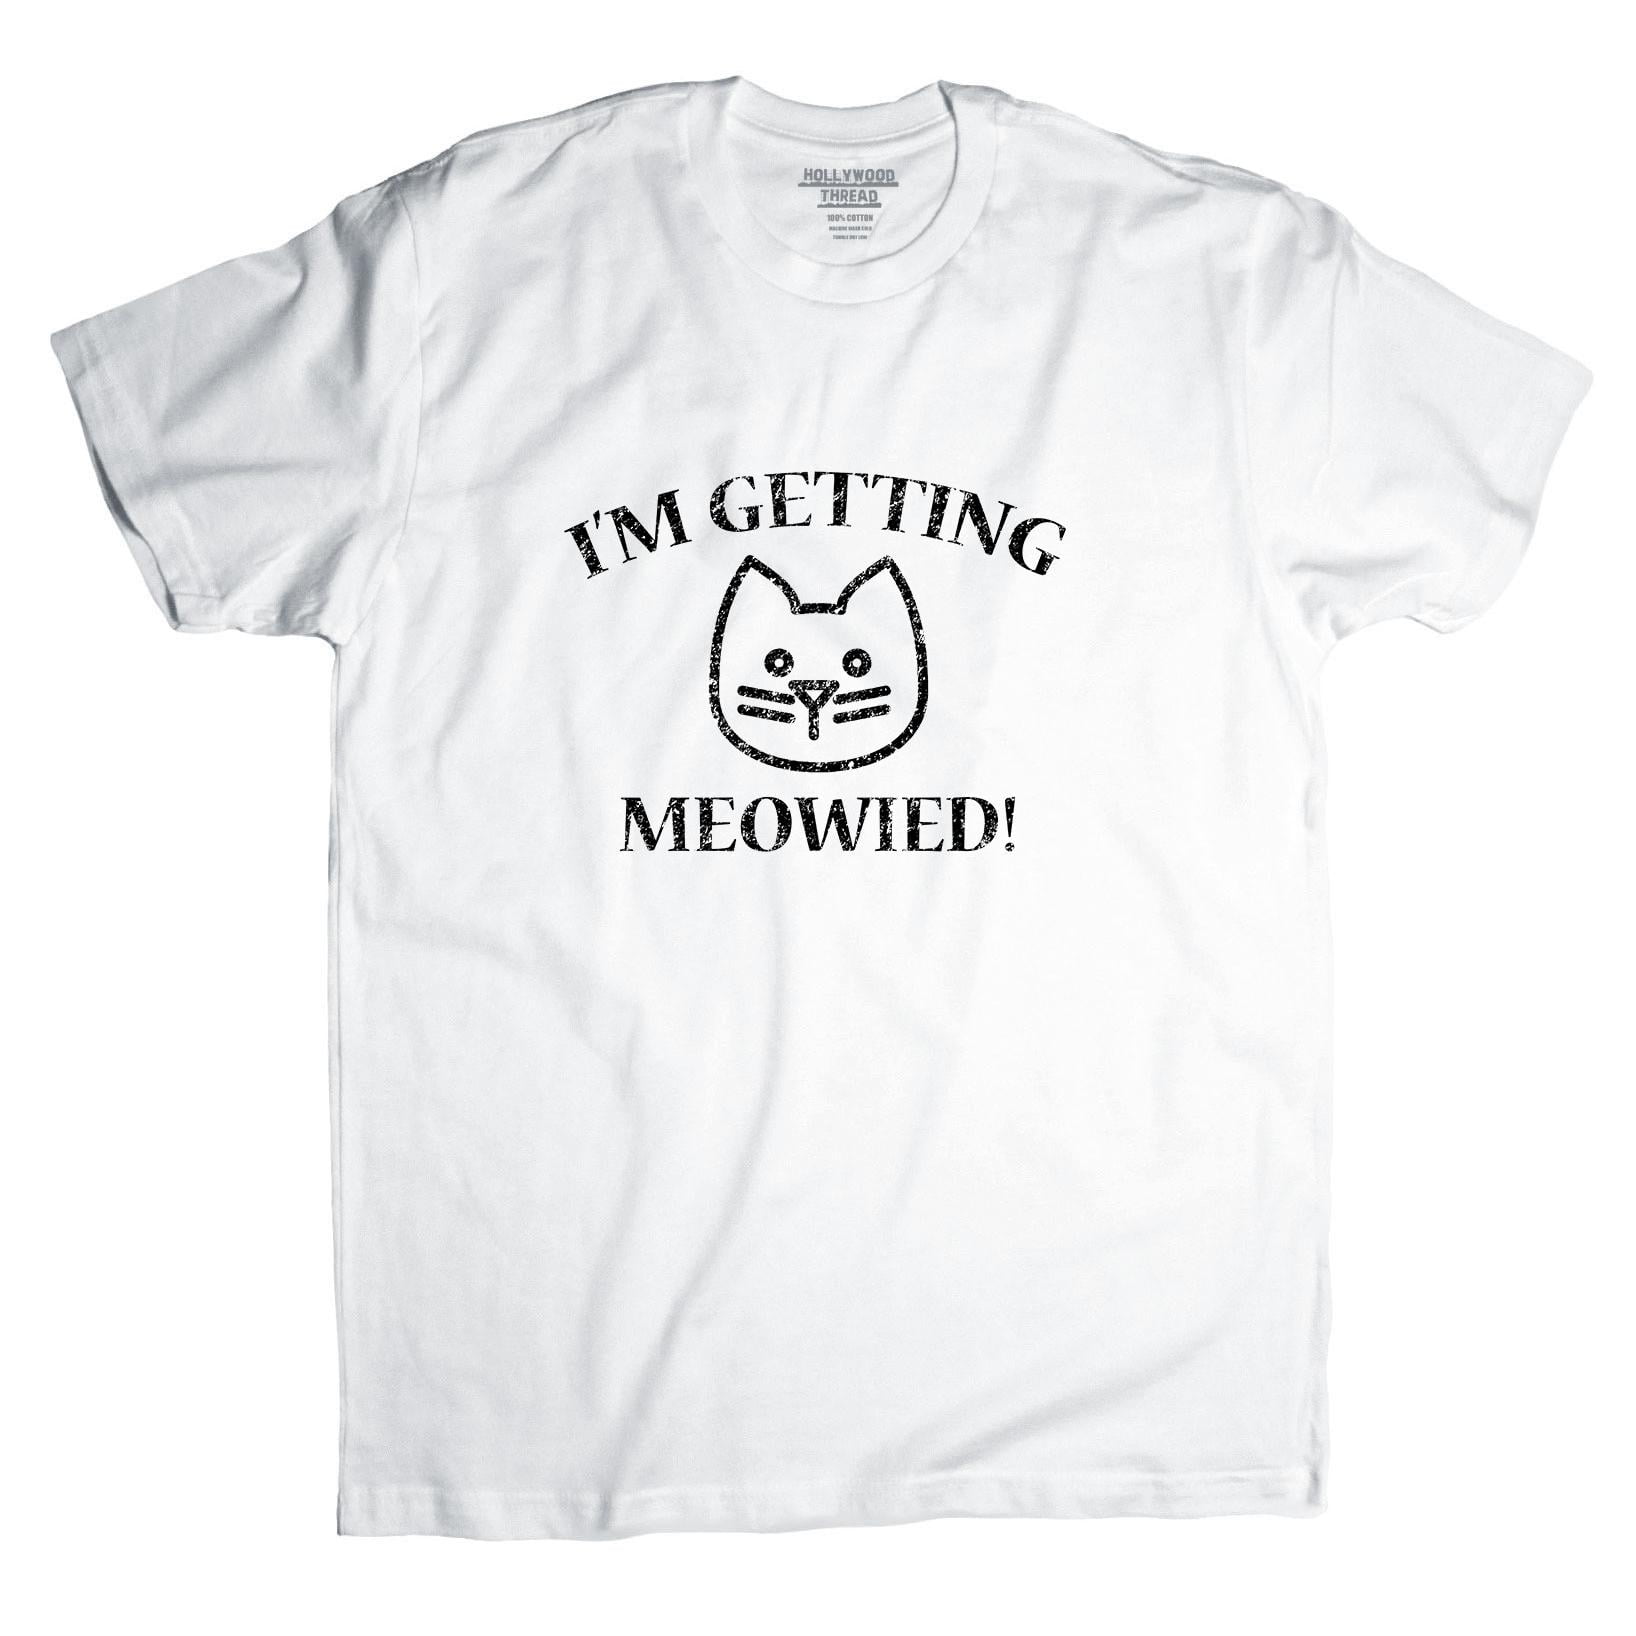 Hollywood Thread - I'm Getting Meowied! - Pet Cat Love Graphic Men's T ...